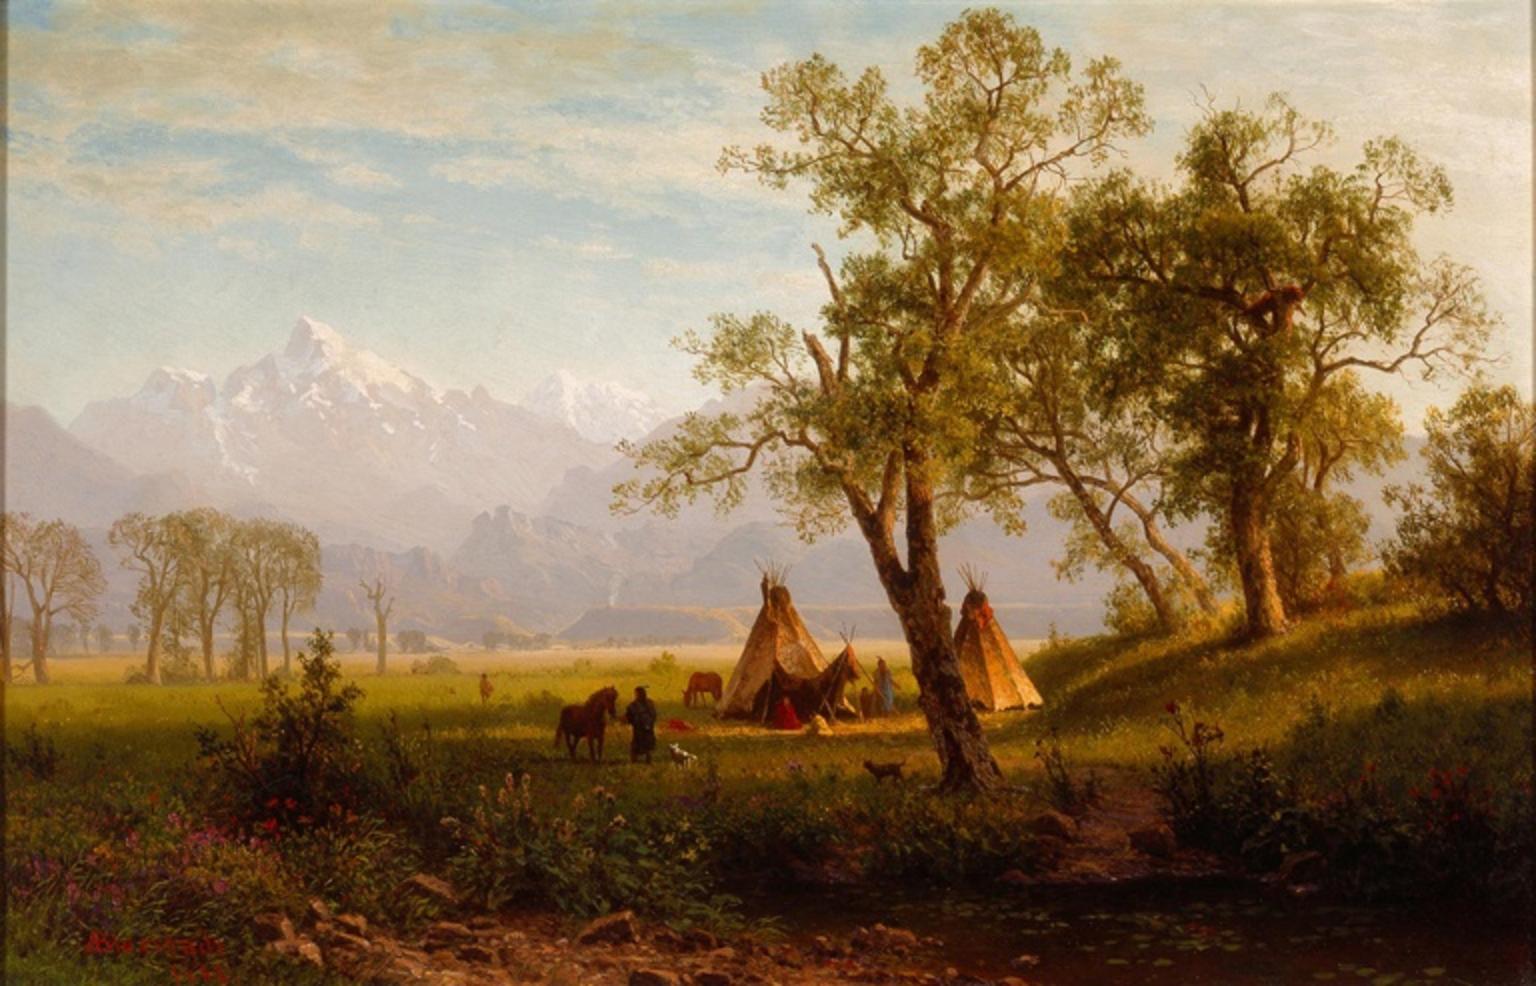 Wind River Mountains, Nebraska Territory," 1862, an oil painting by Albert Bierstadt. Of course, the Wind Rivers are located in Wyoming in the southern reaches of the Greater Yellowstone Ecosystem.